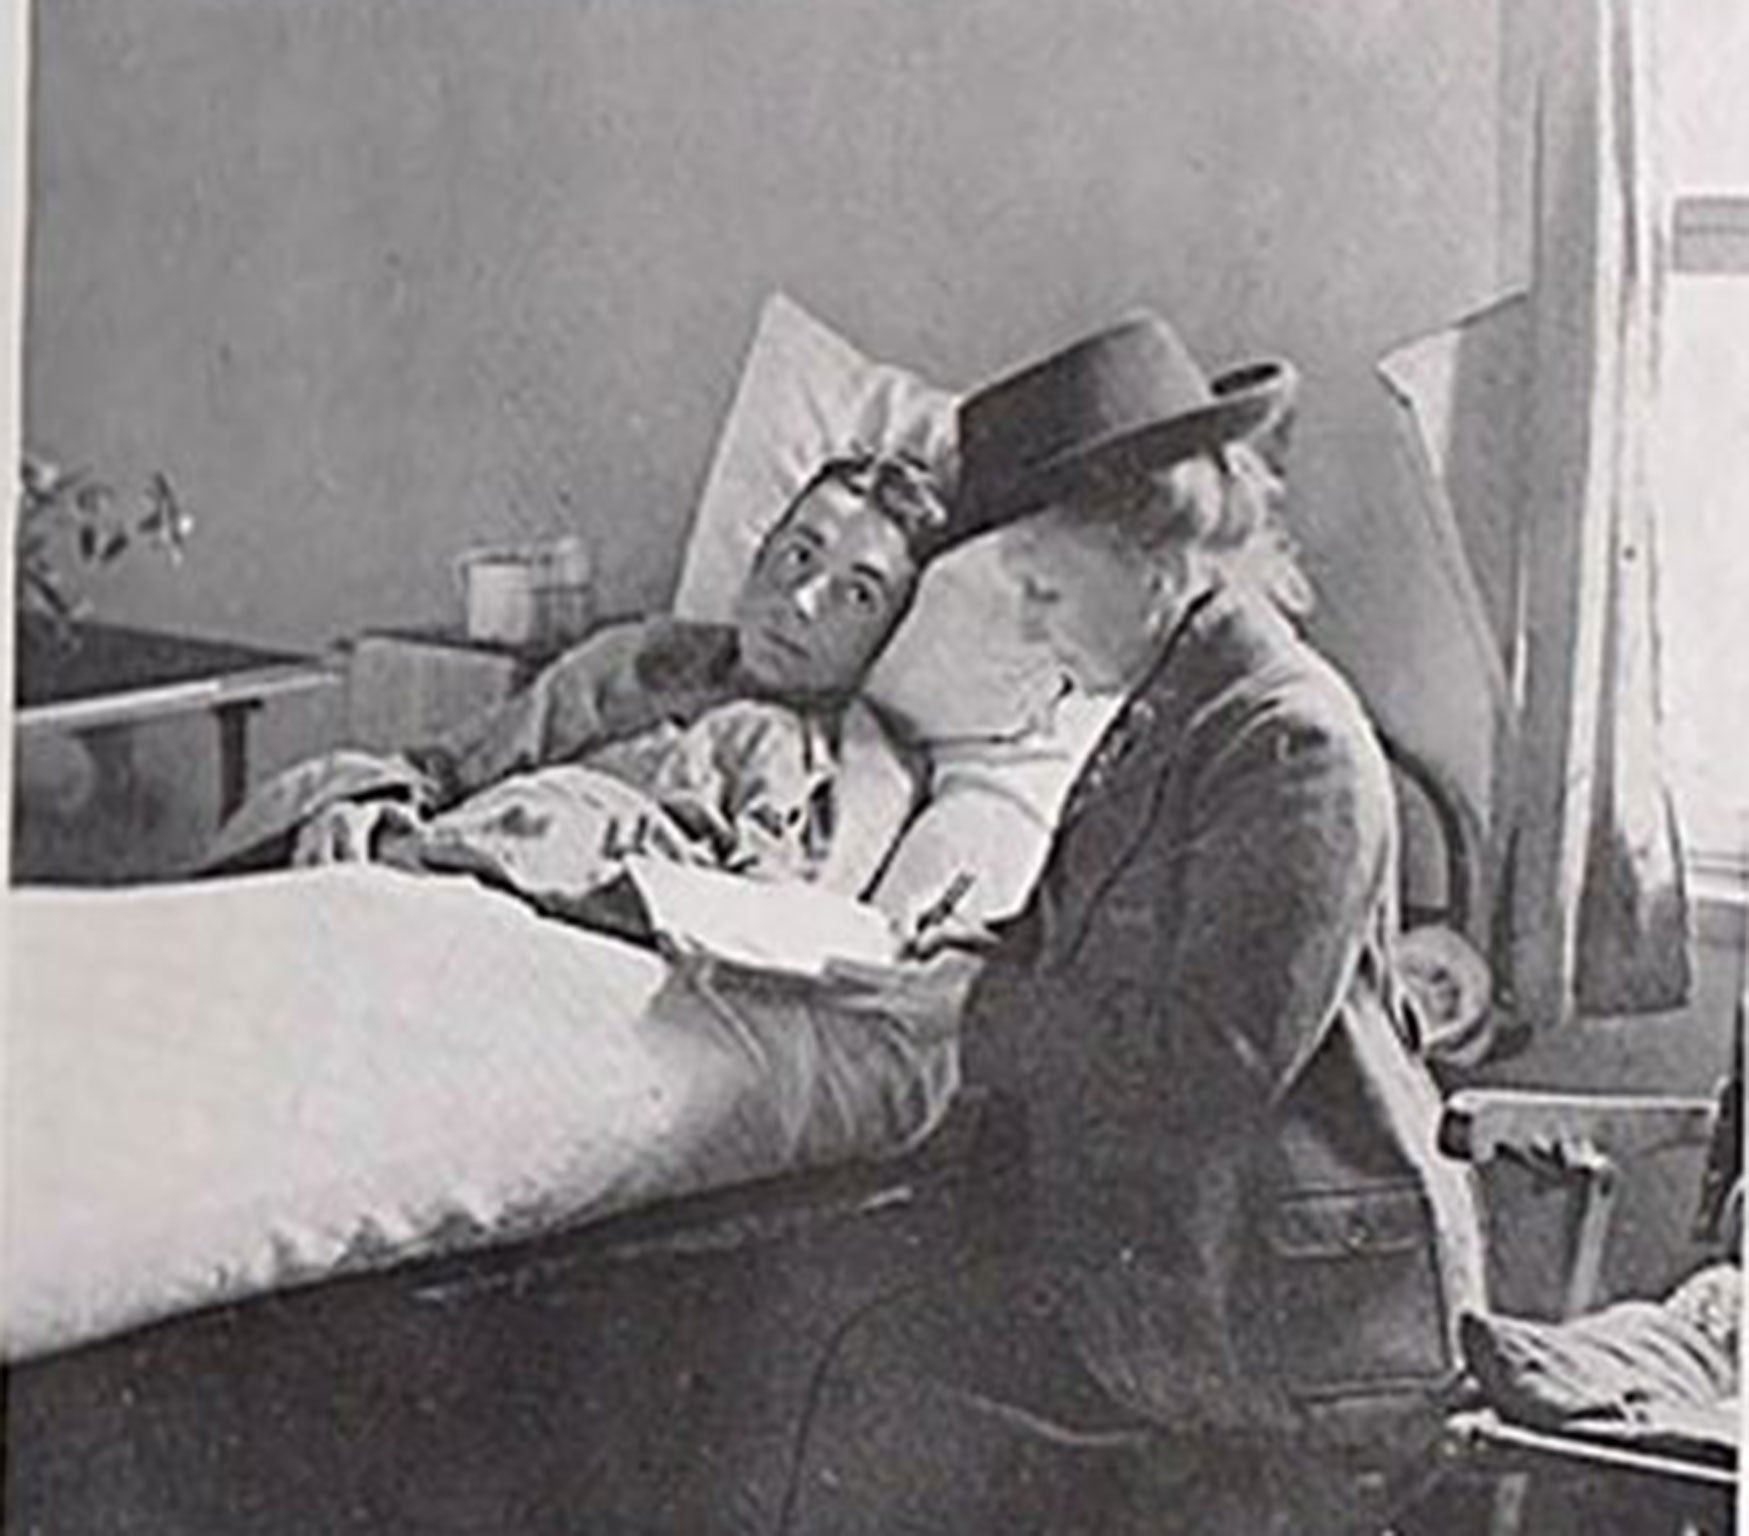 May Bradford writing a letter for an injured soldier in a French hospital